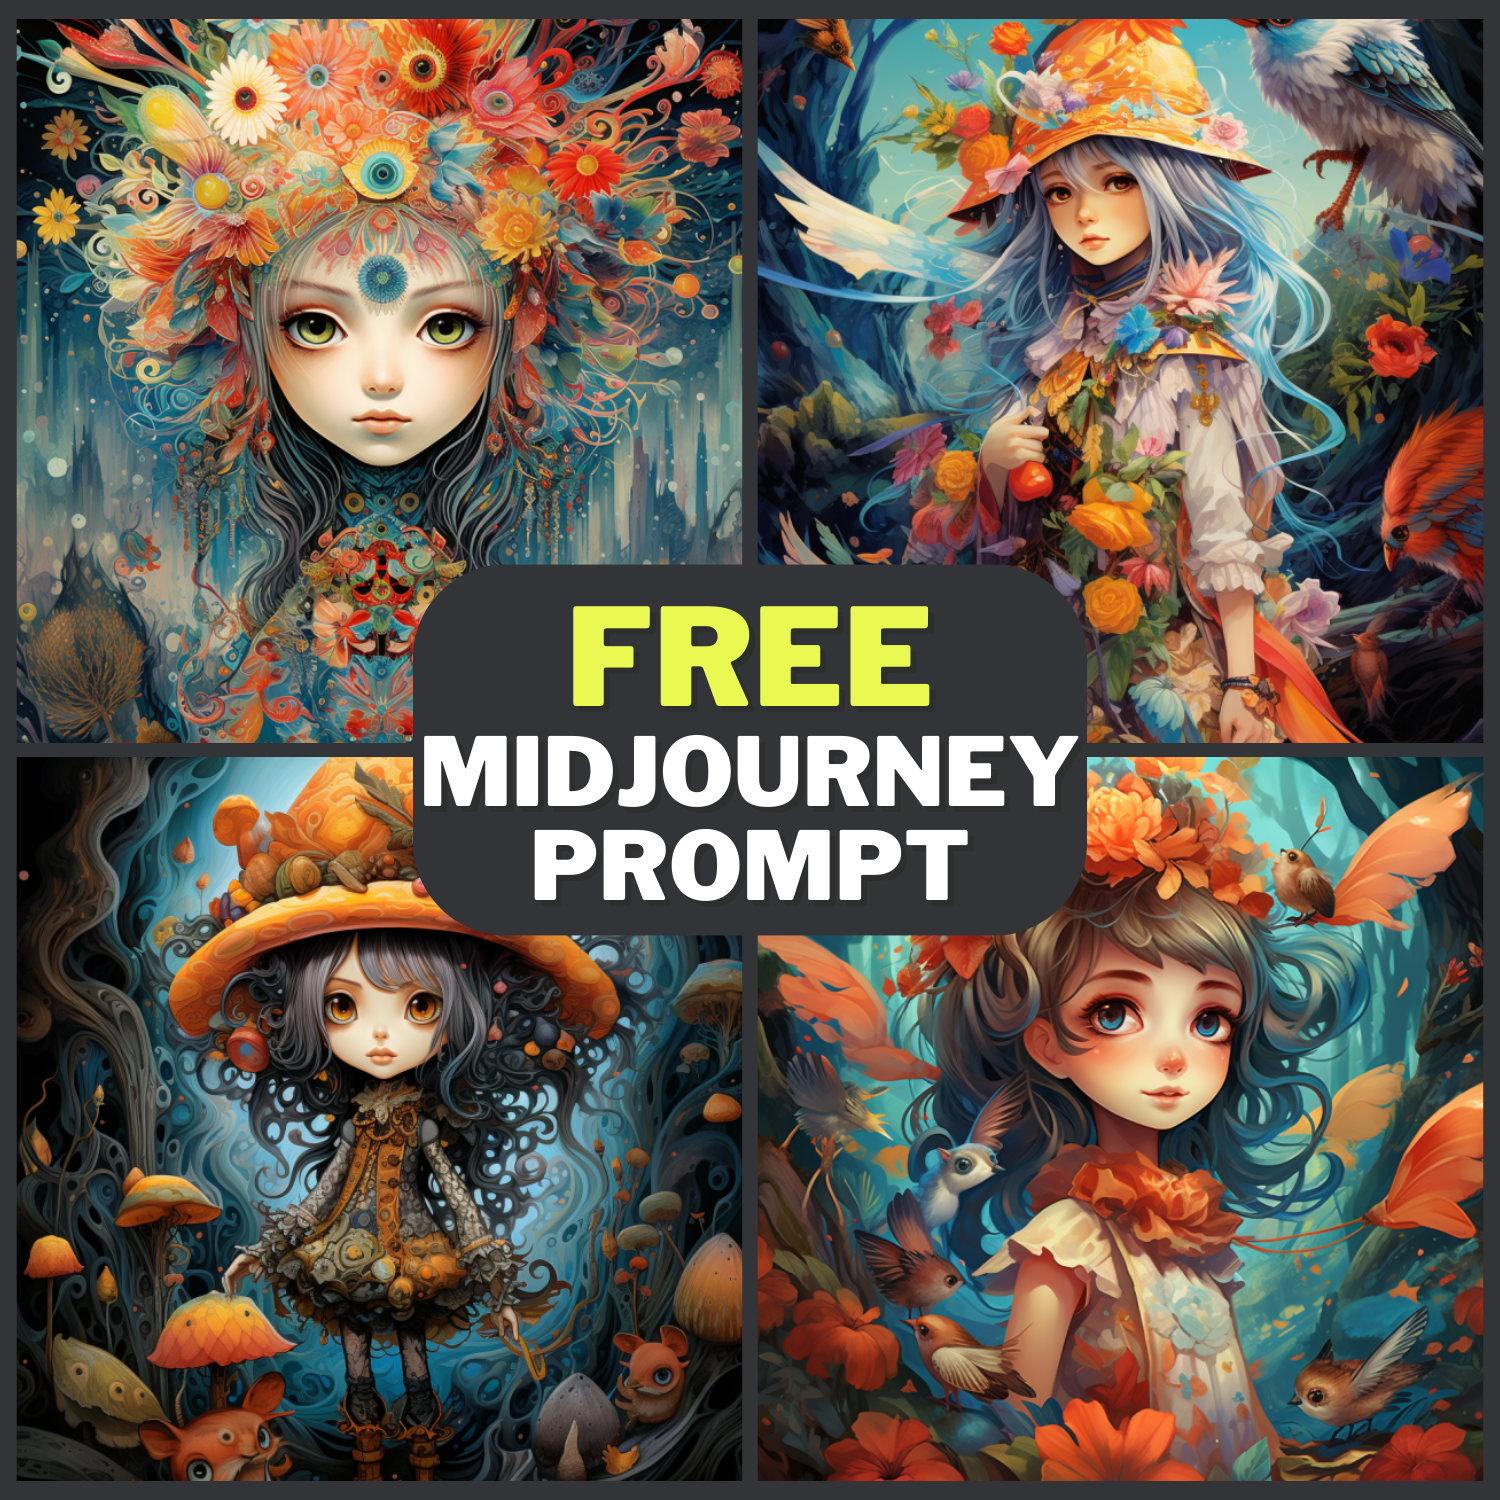 Naive Art and Fantasy Illustration Free Midjourney Prompt 1